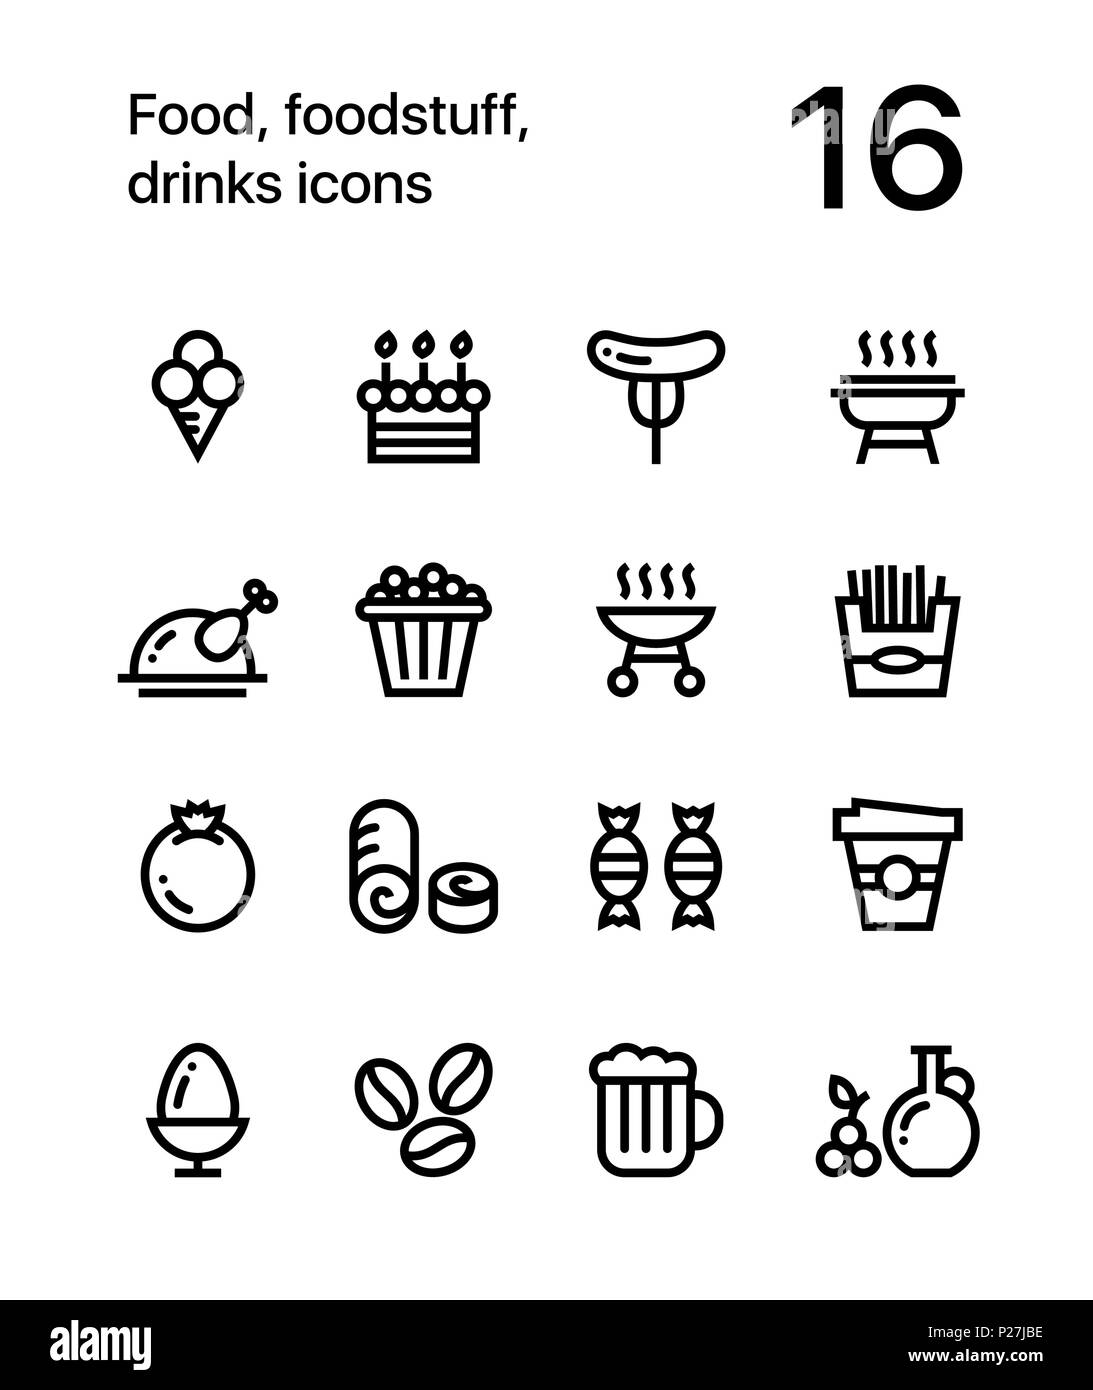 Food, foodstuff, drinks icons for web and mobile design pack 4 Stock Vector